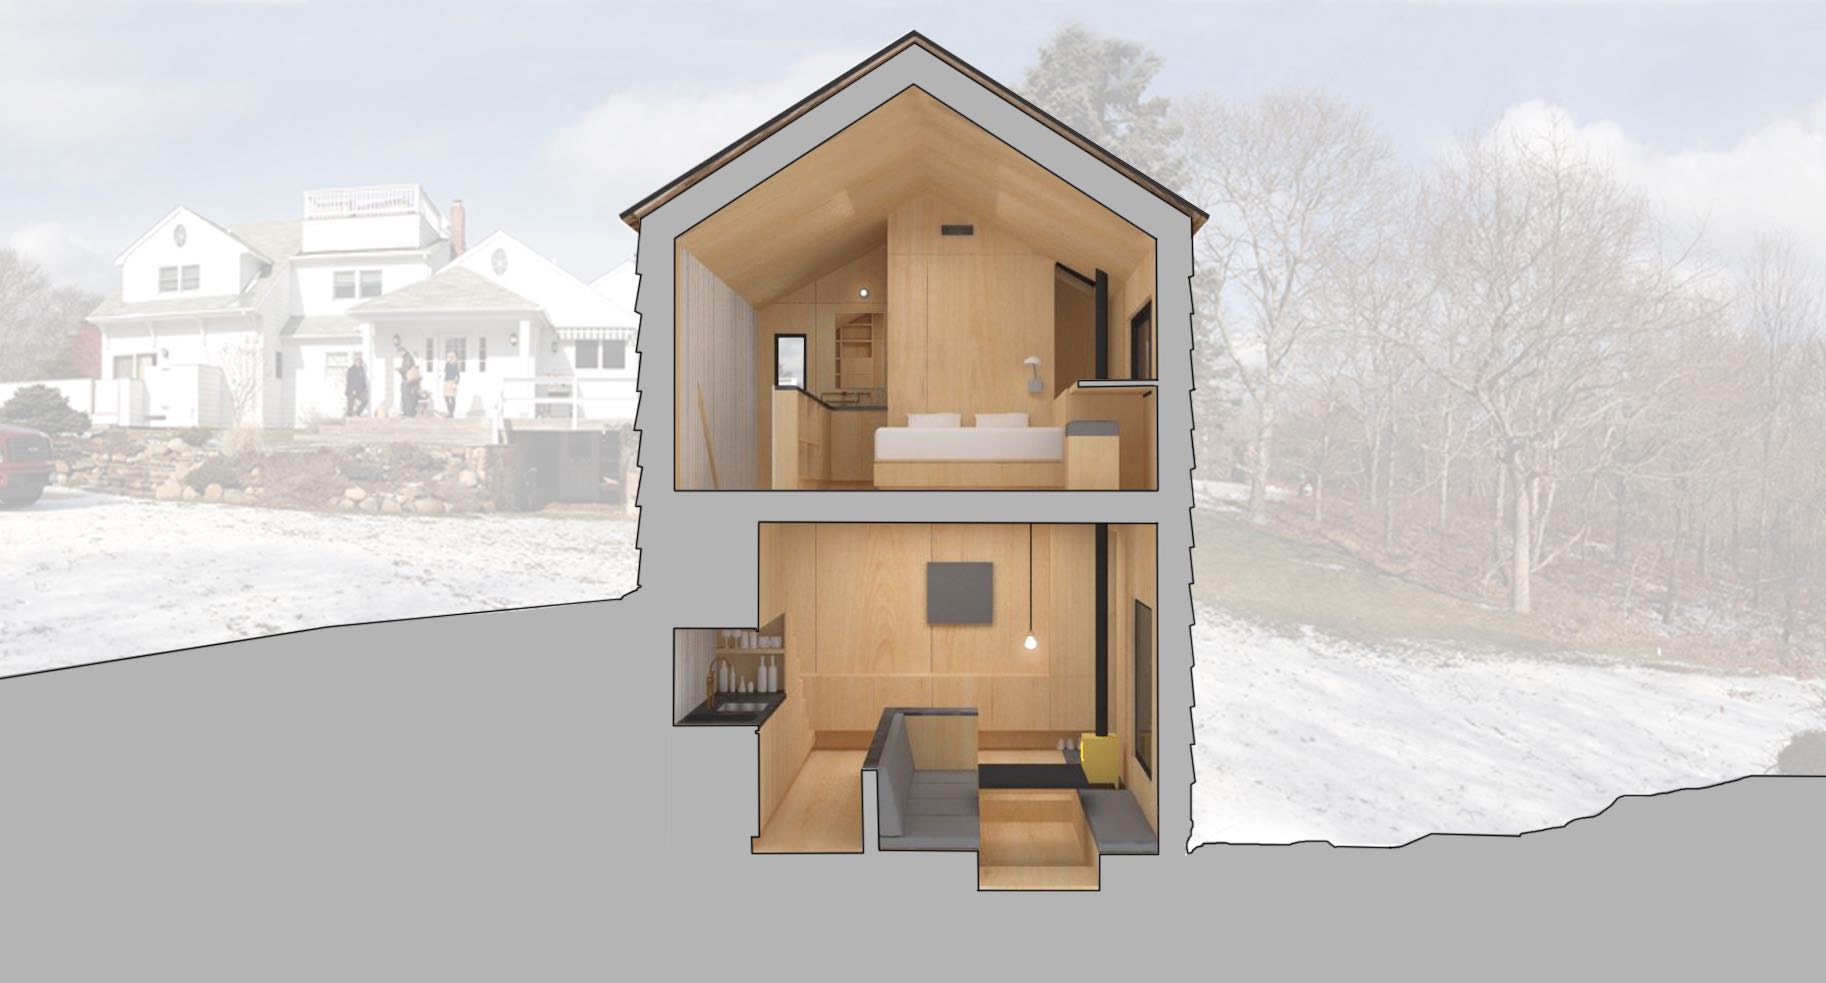 New York Architect Architecture Build Mini Cabin Tiny House Guest Vacation Home Reclaimed Materials Small Houses Natural Nature Retreat Rendering Double-Height